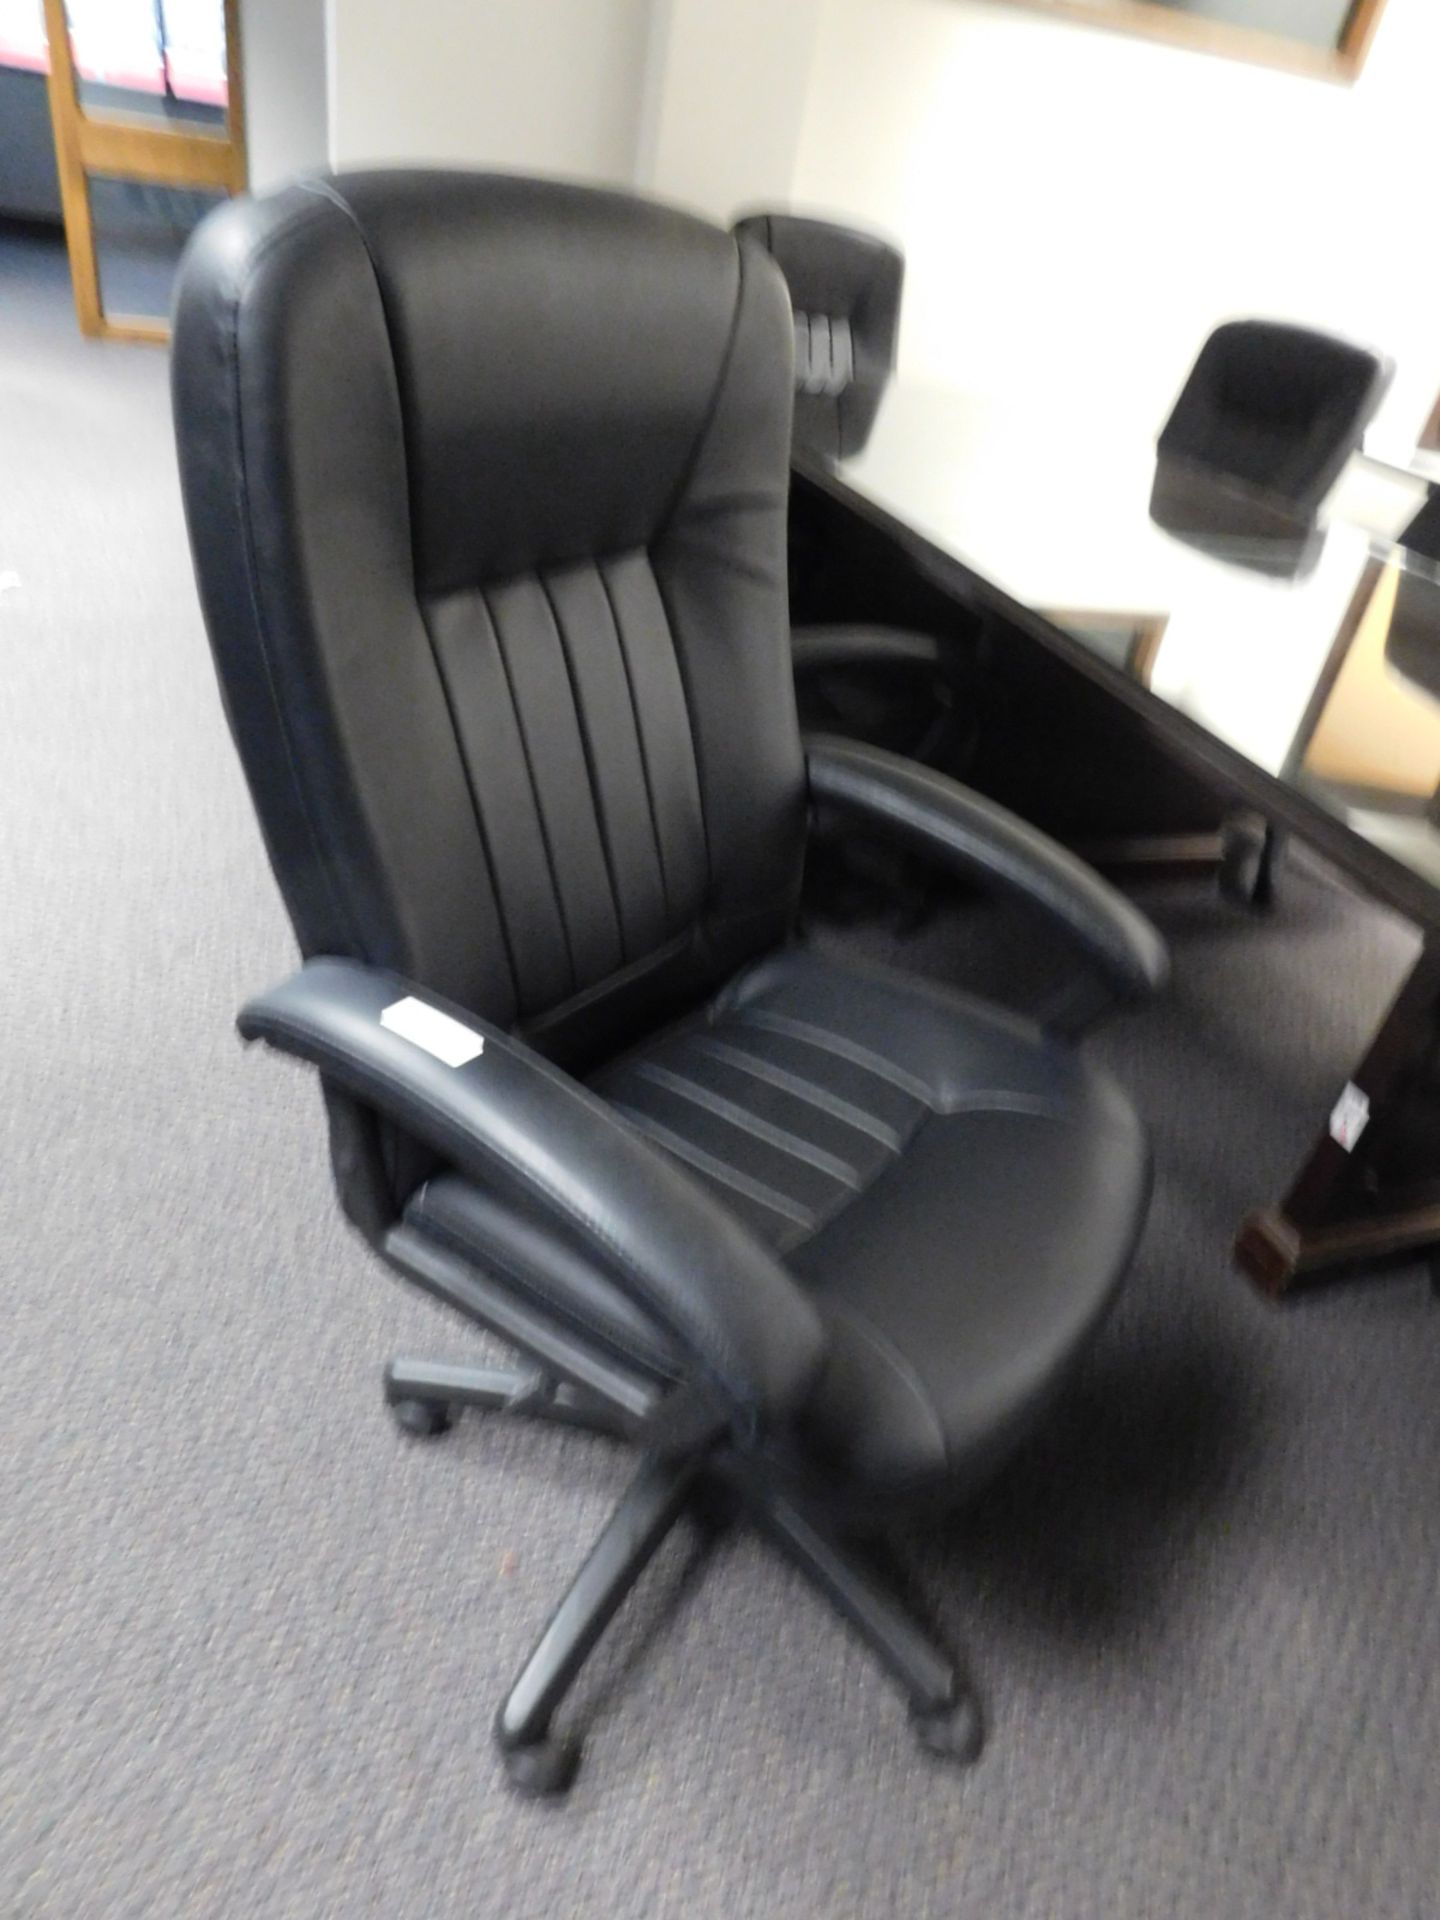 REALSPACE HIGH BACK LEATHER EXECUTIVE CHAIR, PNEUMATIC OPERATED, 5 STAR BASE, CARPET CASTORS, NEAR